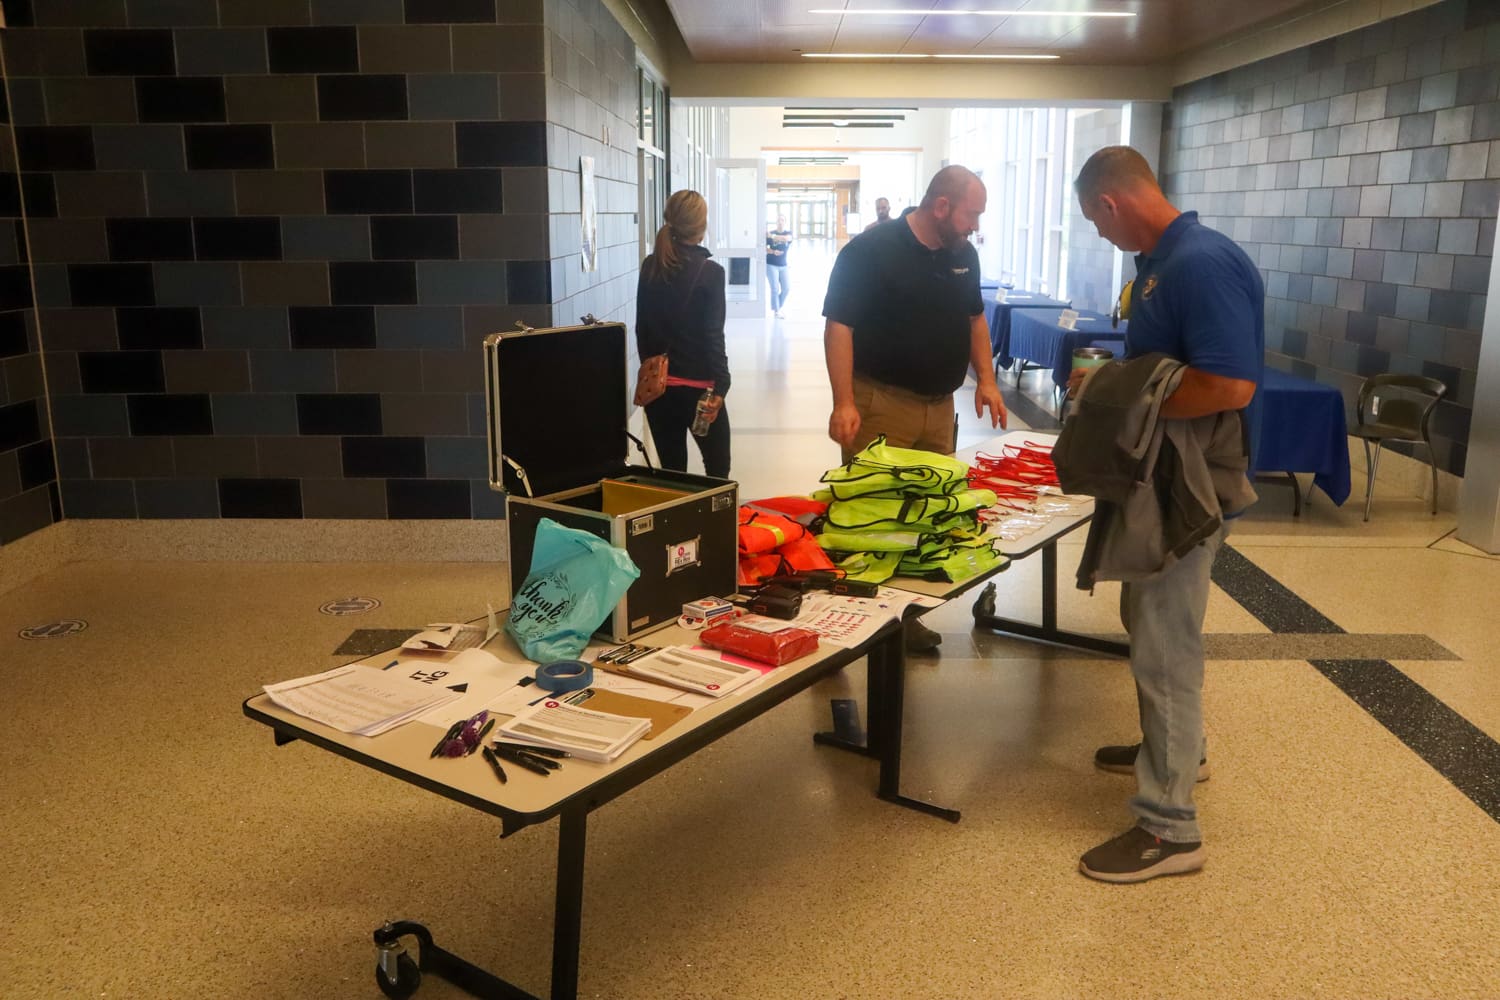 In a statewide effort to ensure school safety, six training sessions on reunification have been held in Delaware in August.